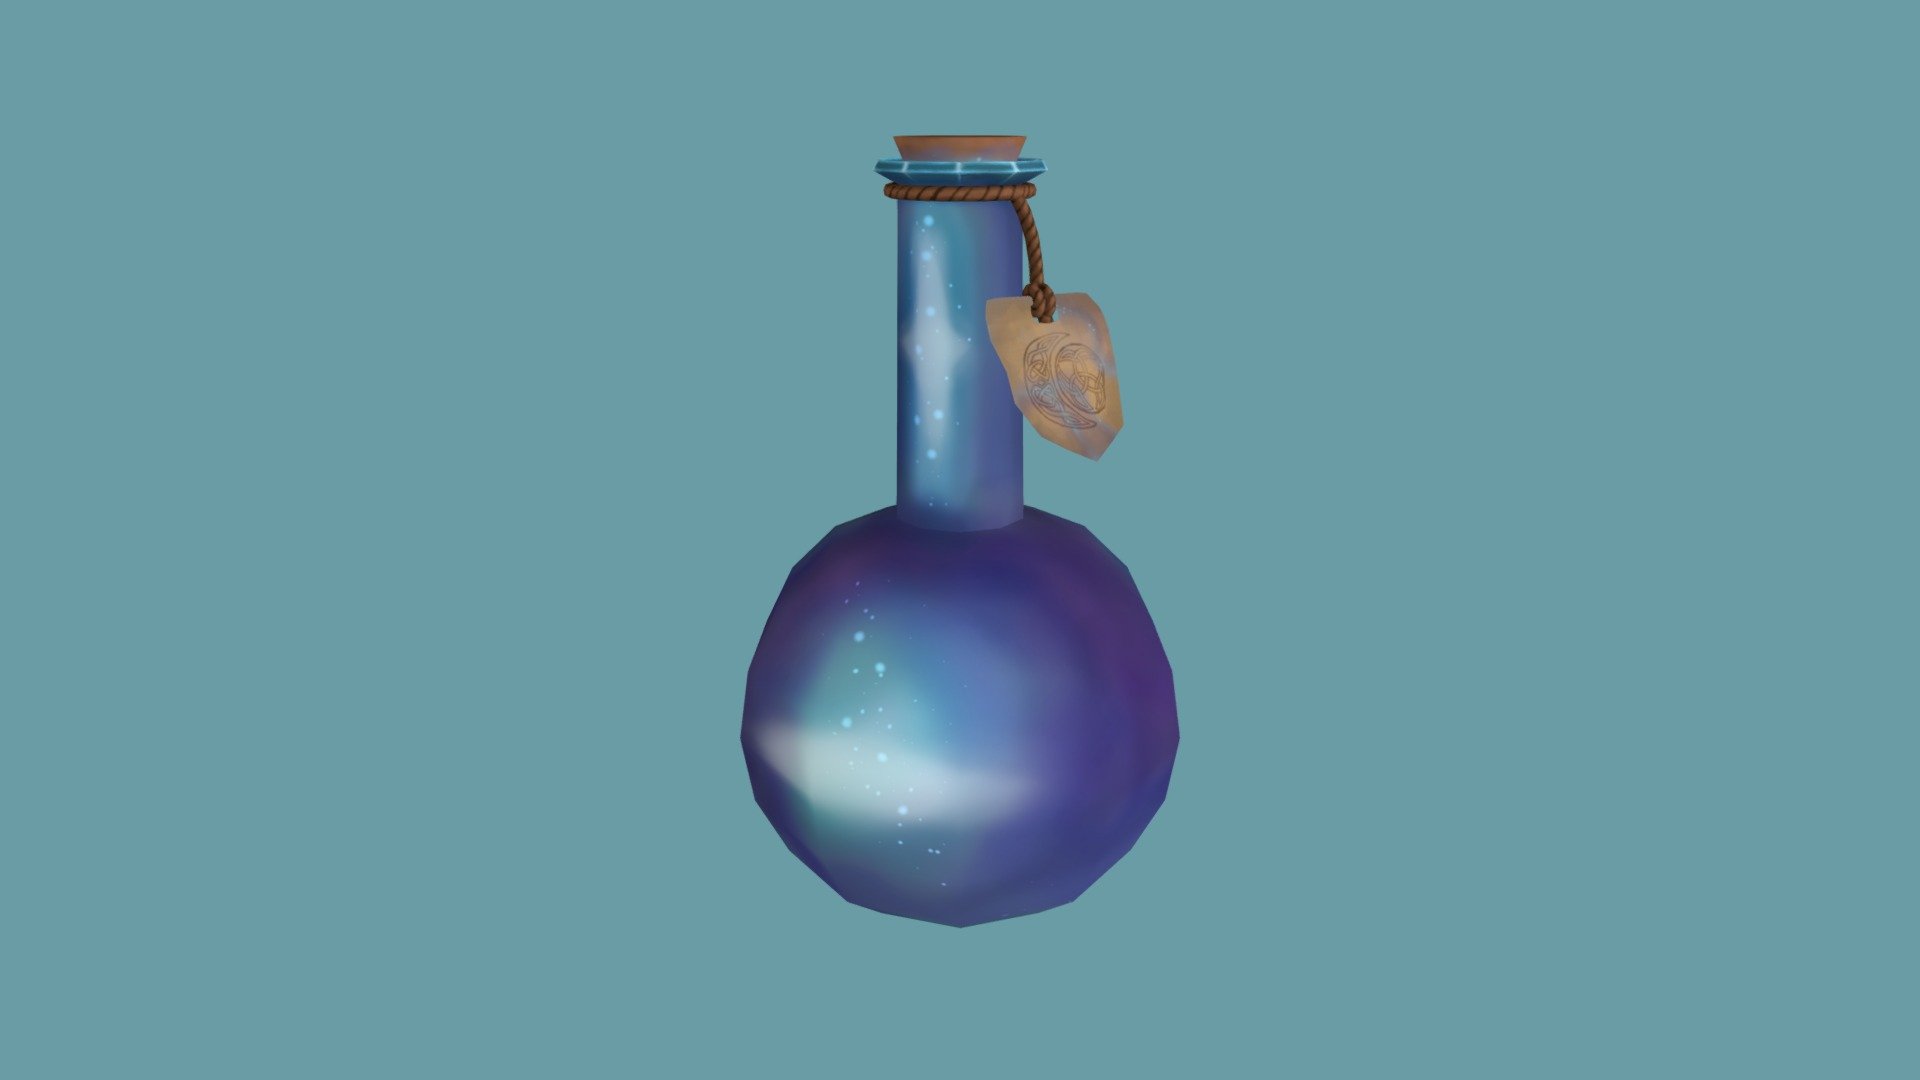 RPG Potion Bottle: LowPoly Hand Painted Model